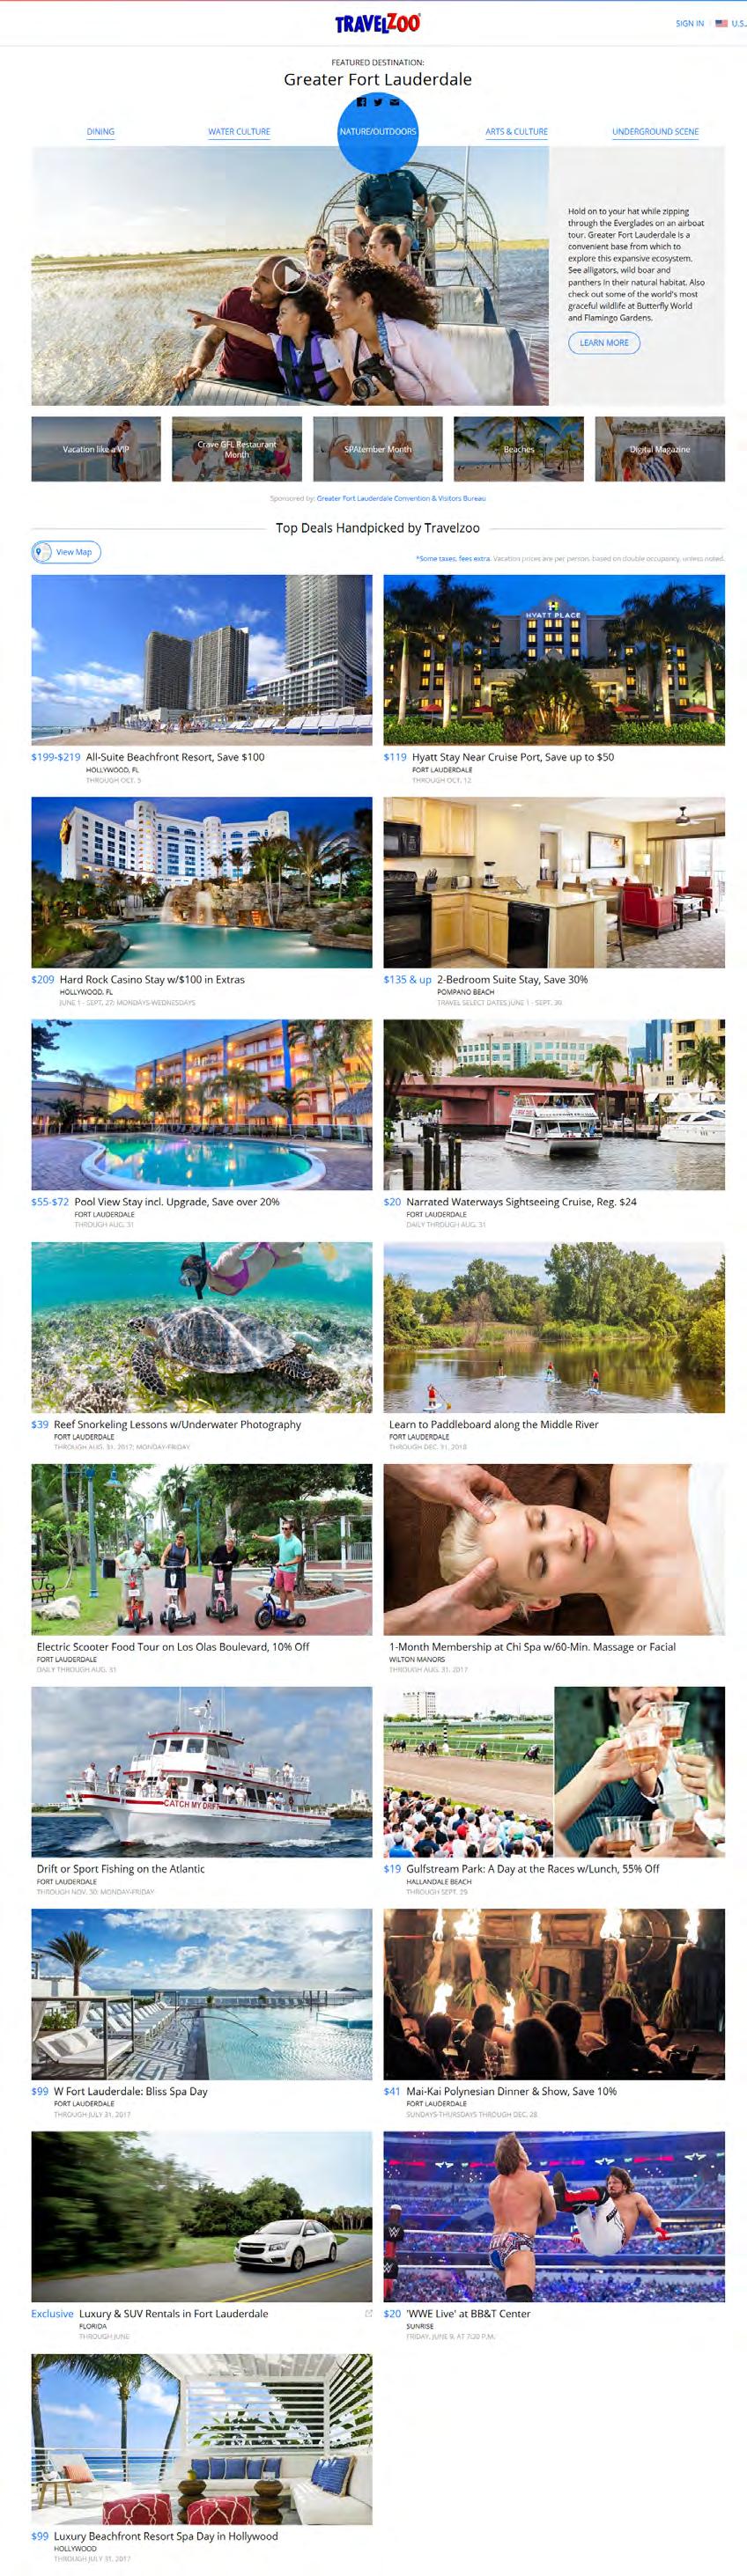 Travelzoo Winter Digital Program Distribution: Featured Destination Platform Thumbnail links for sales inquiry or promotional opportunities 5 Focus points, vibrant images, videos Up to 10 travel